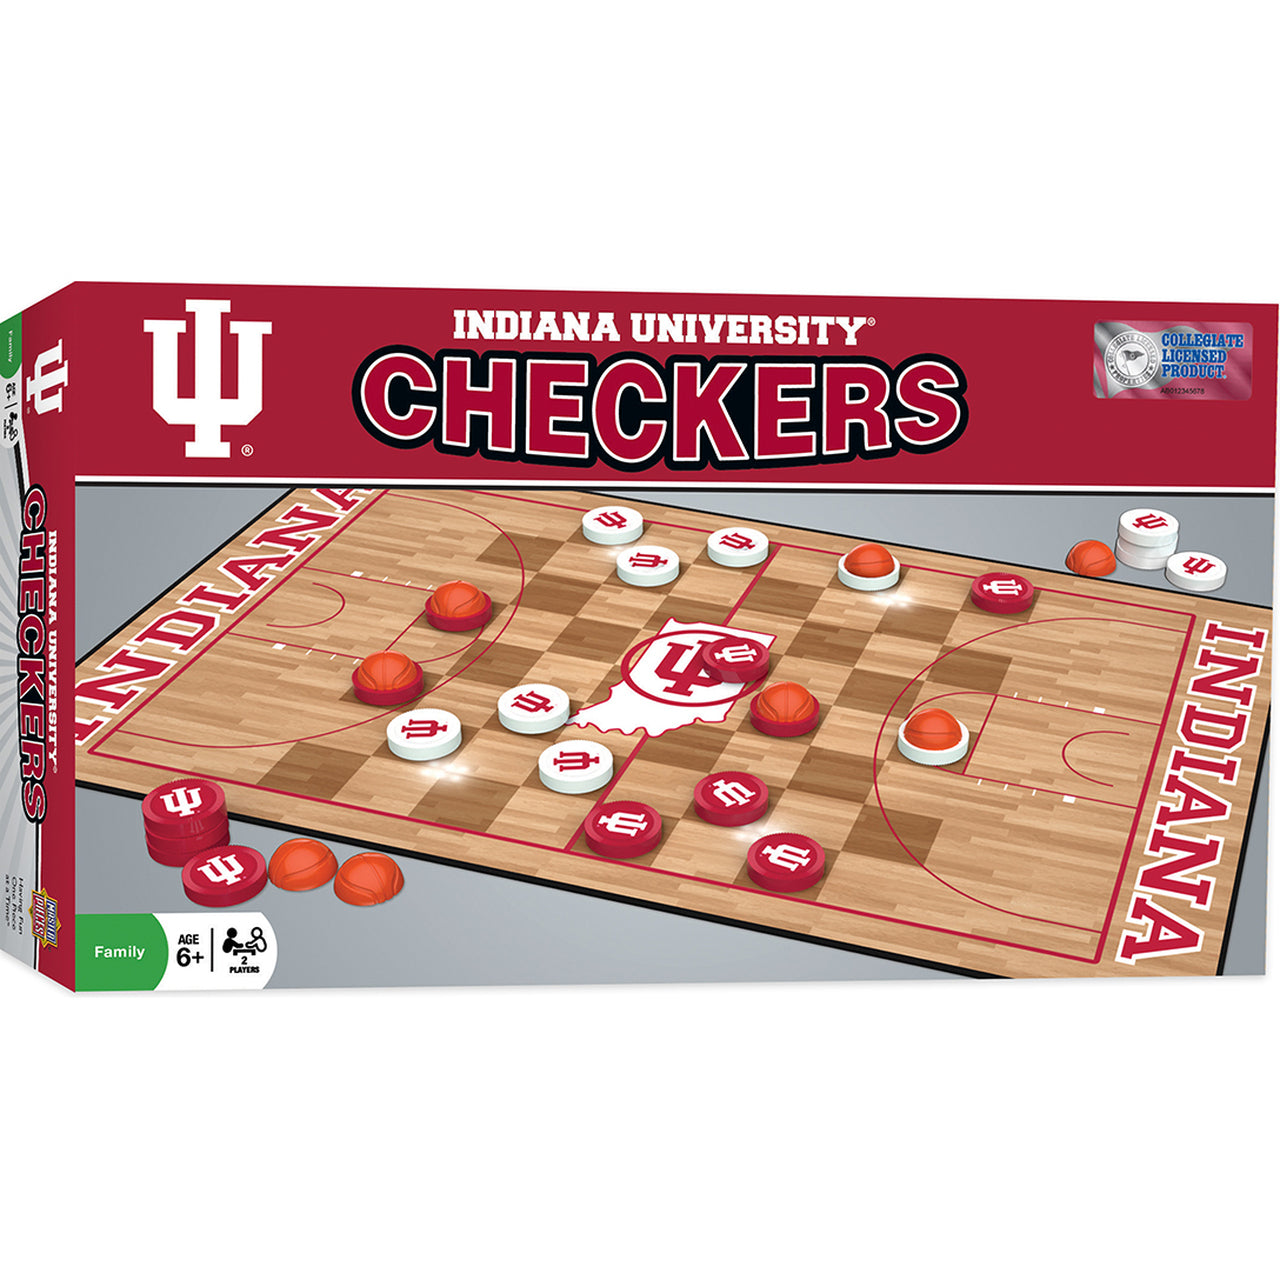 Indiana Hoosiers Basketball Checkers Board Game by Masterpieces